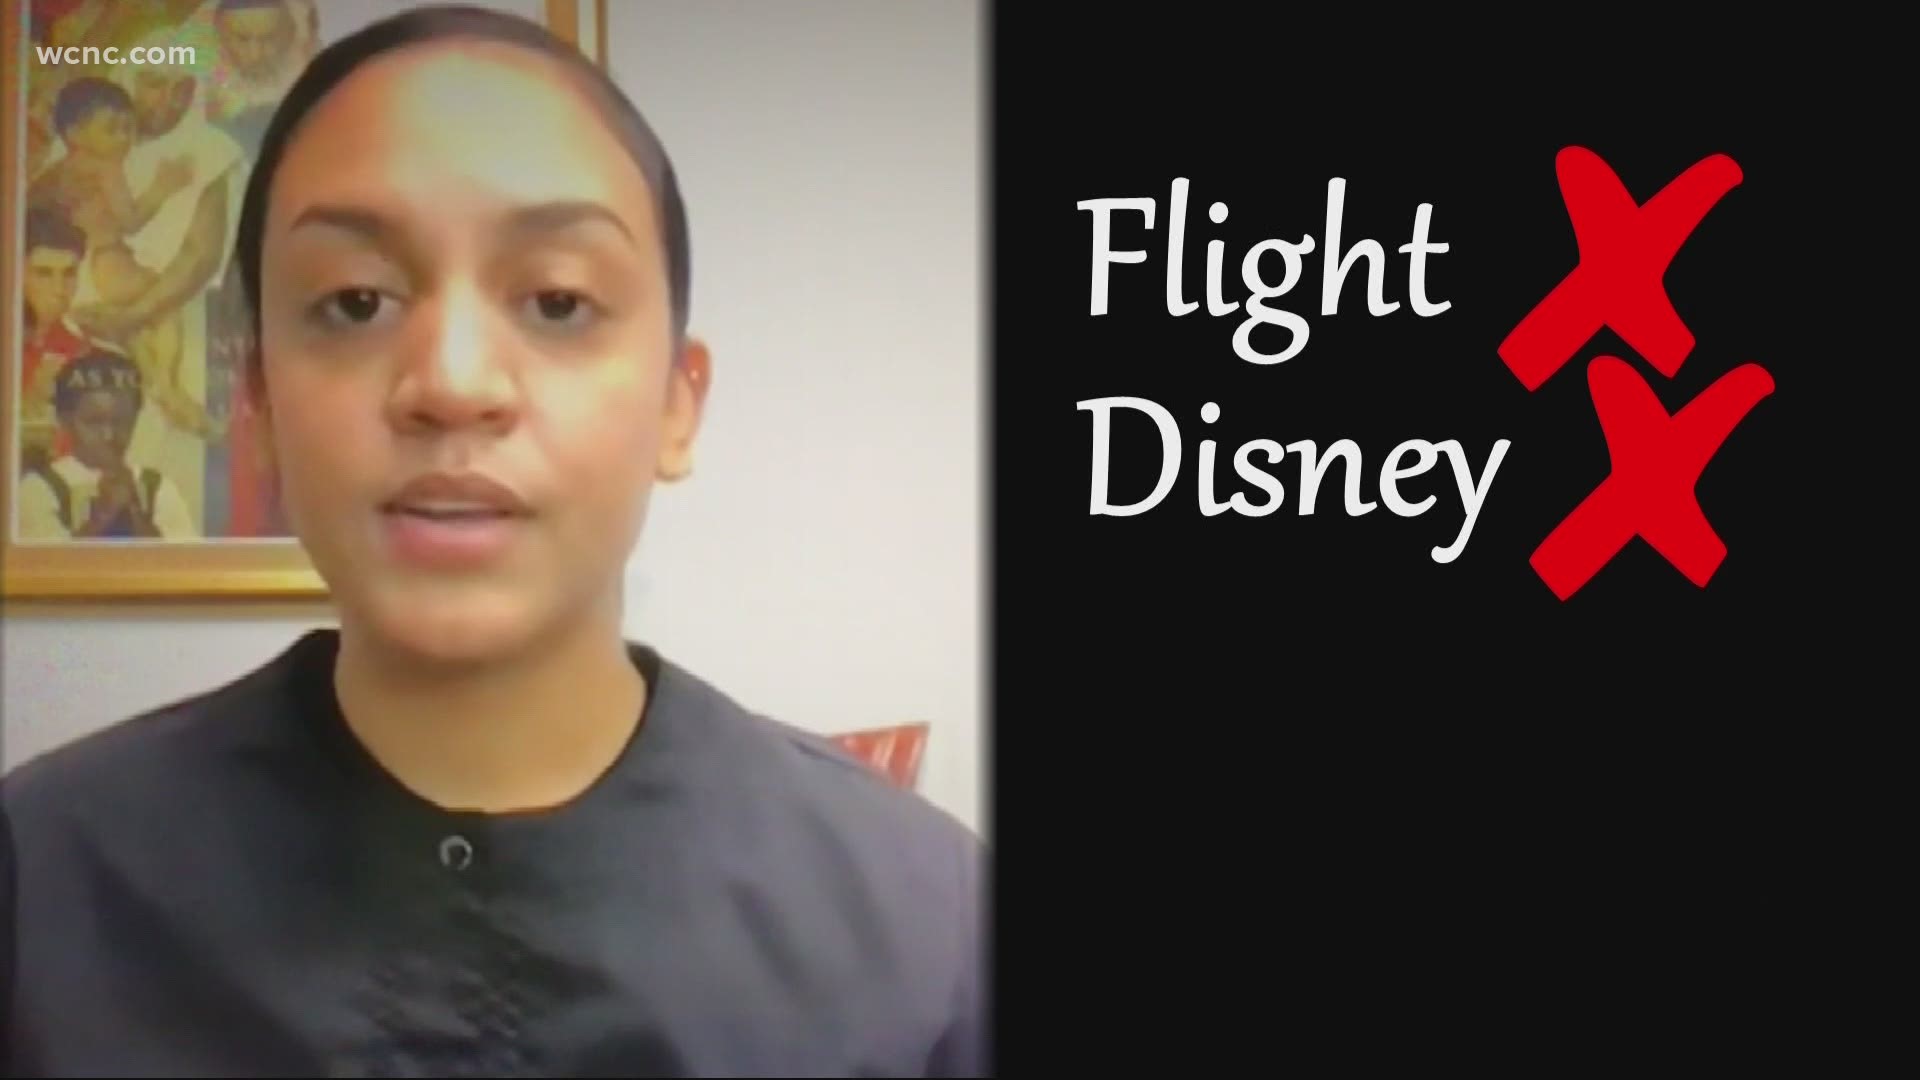 Desirae Rosario booked a trip last spring to Disney, but when COVID-19 hit, she had to cancel. Frontier Airline told her the flight voucher was no good, expired.